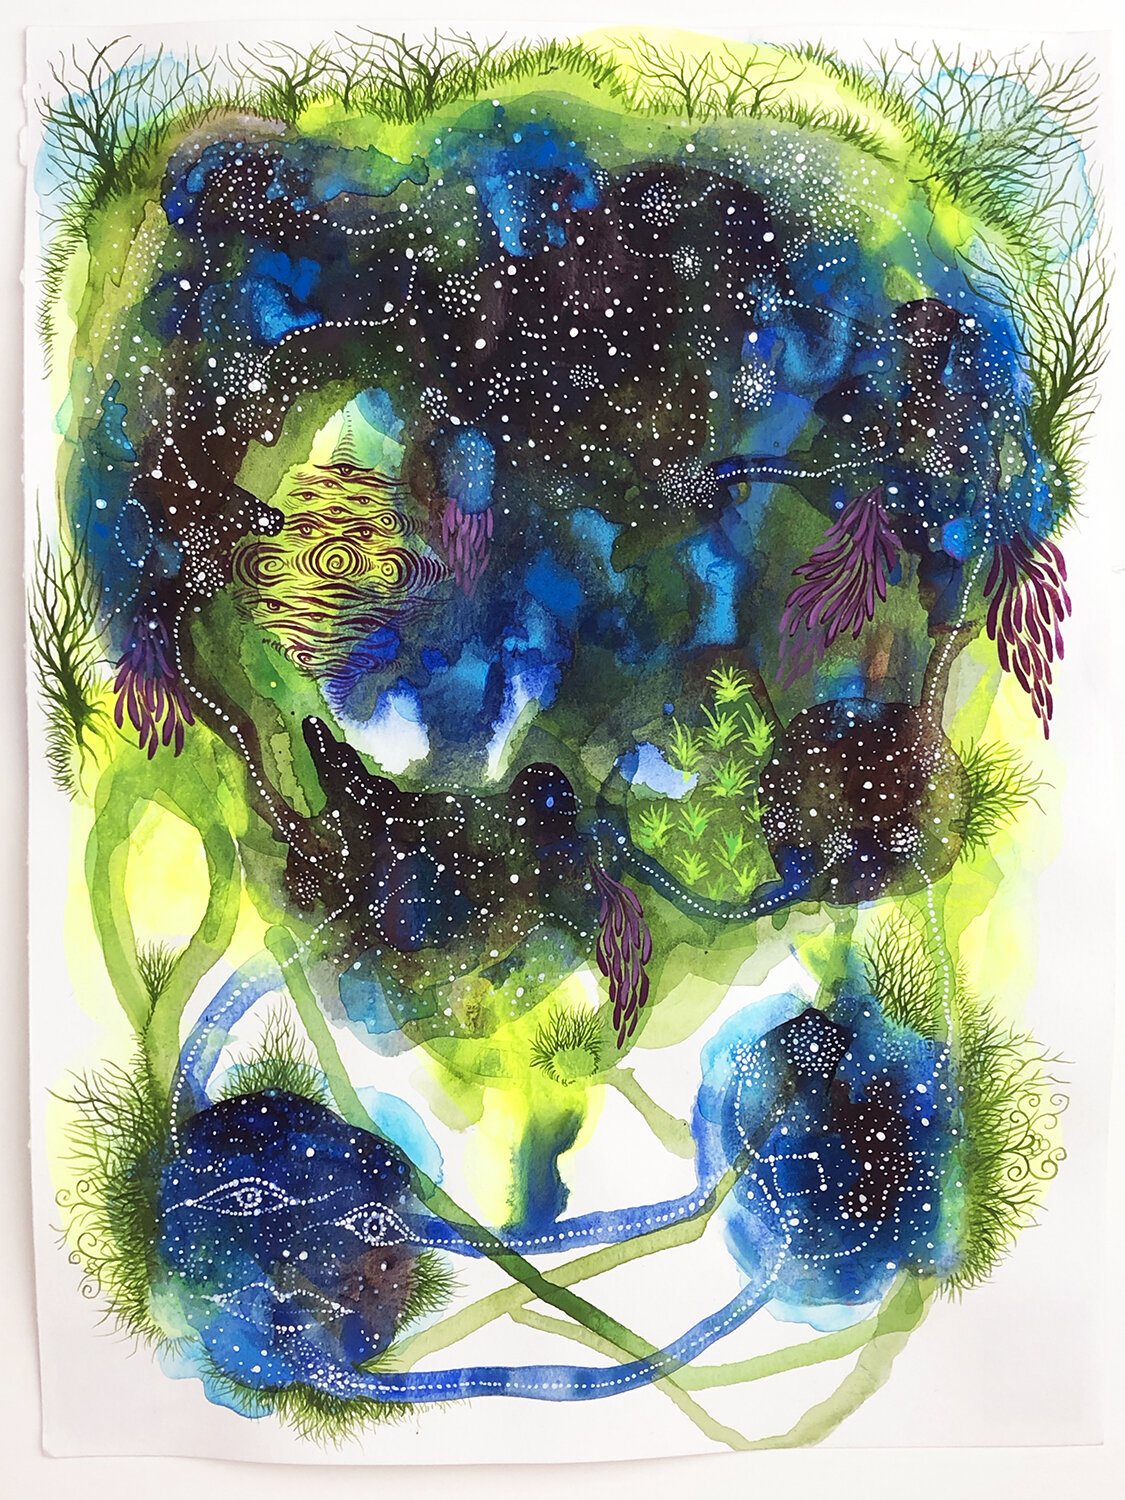 Carrie Lederer, Connection in the Cosmos, 2021, Acryla gouache on paper, 12 x 10"